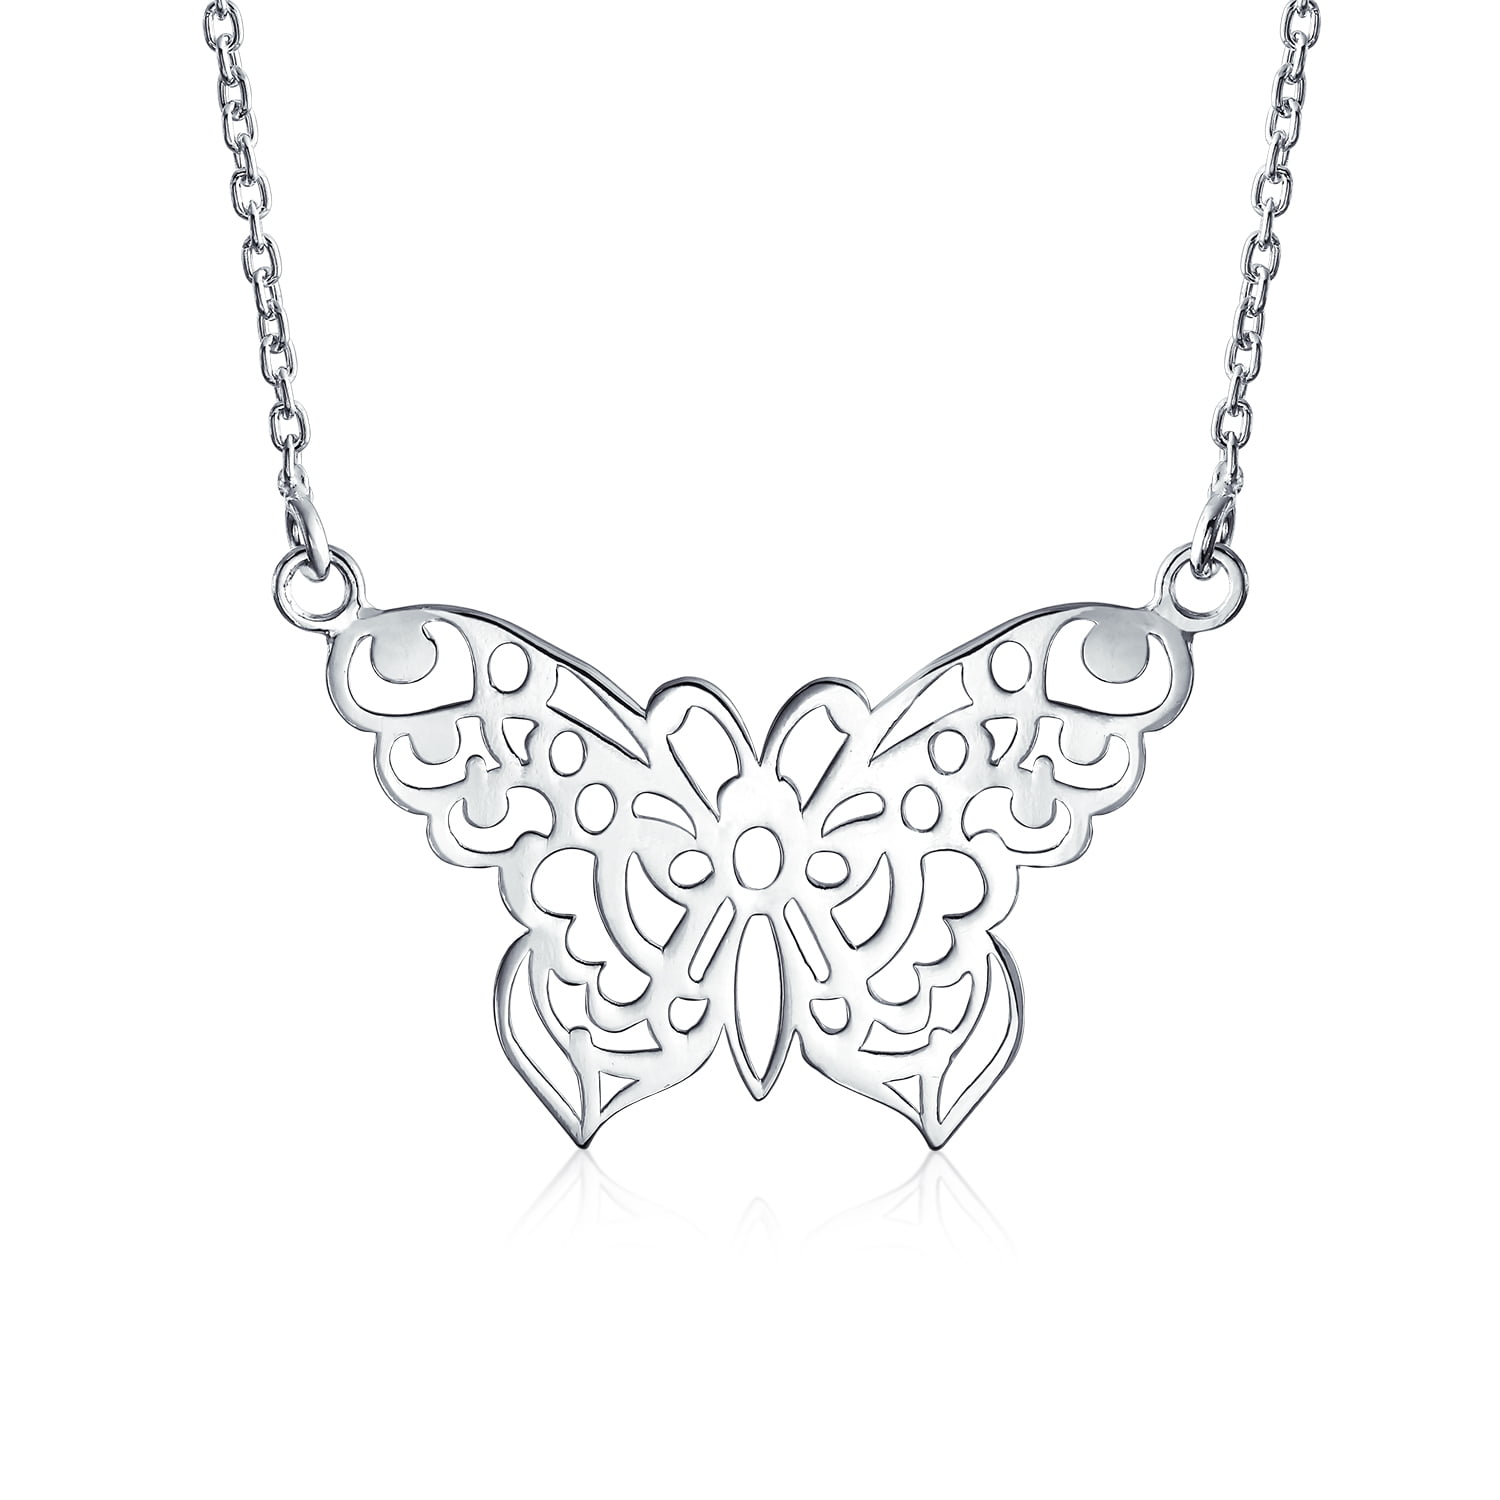 Auzeuner Women Butterfly Charm Cubic Zirconia 925 Sterling Silver Pendant Necklace 18 inch Chain